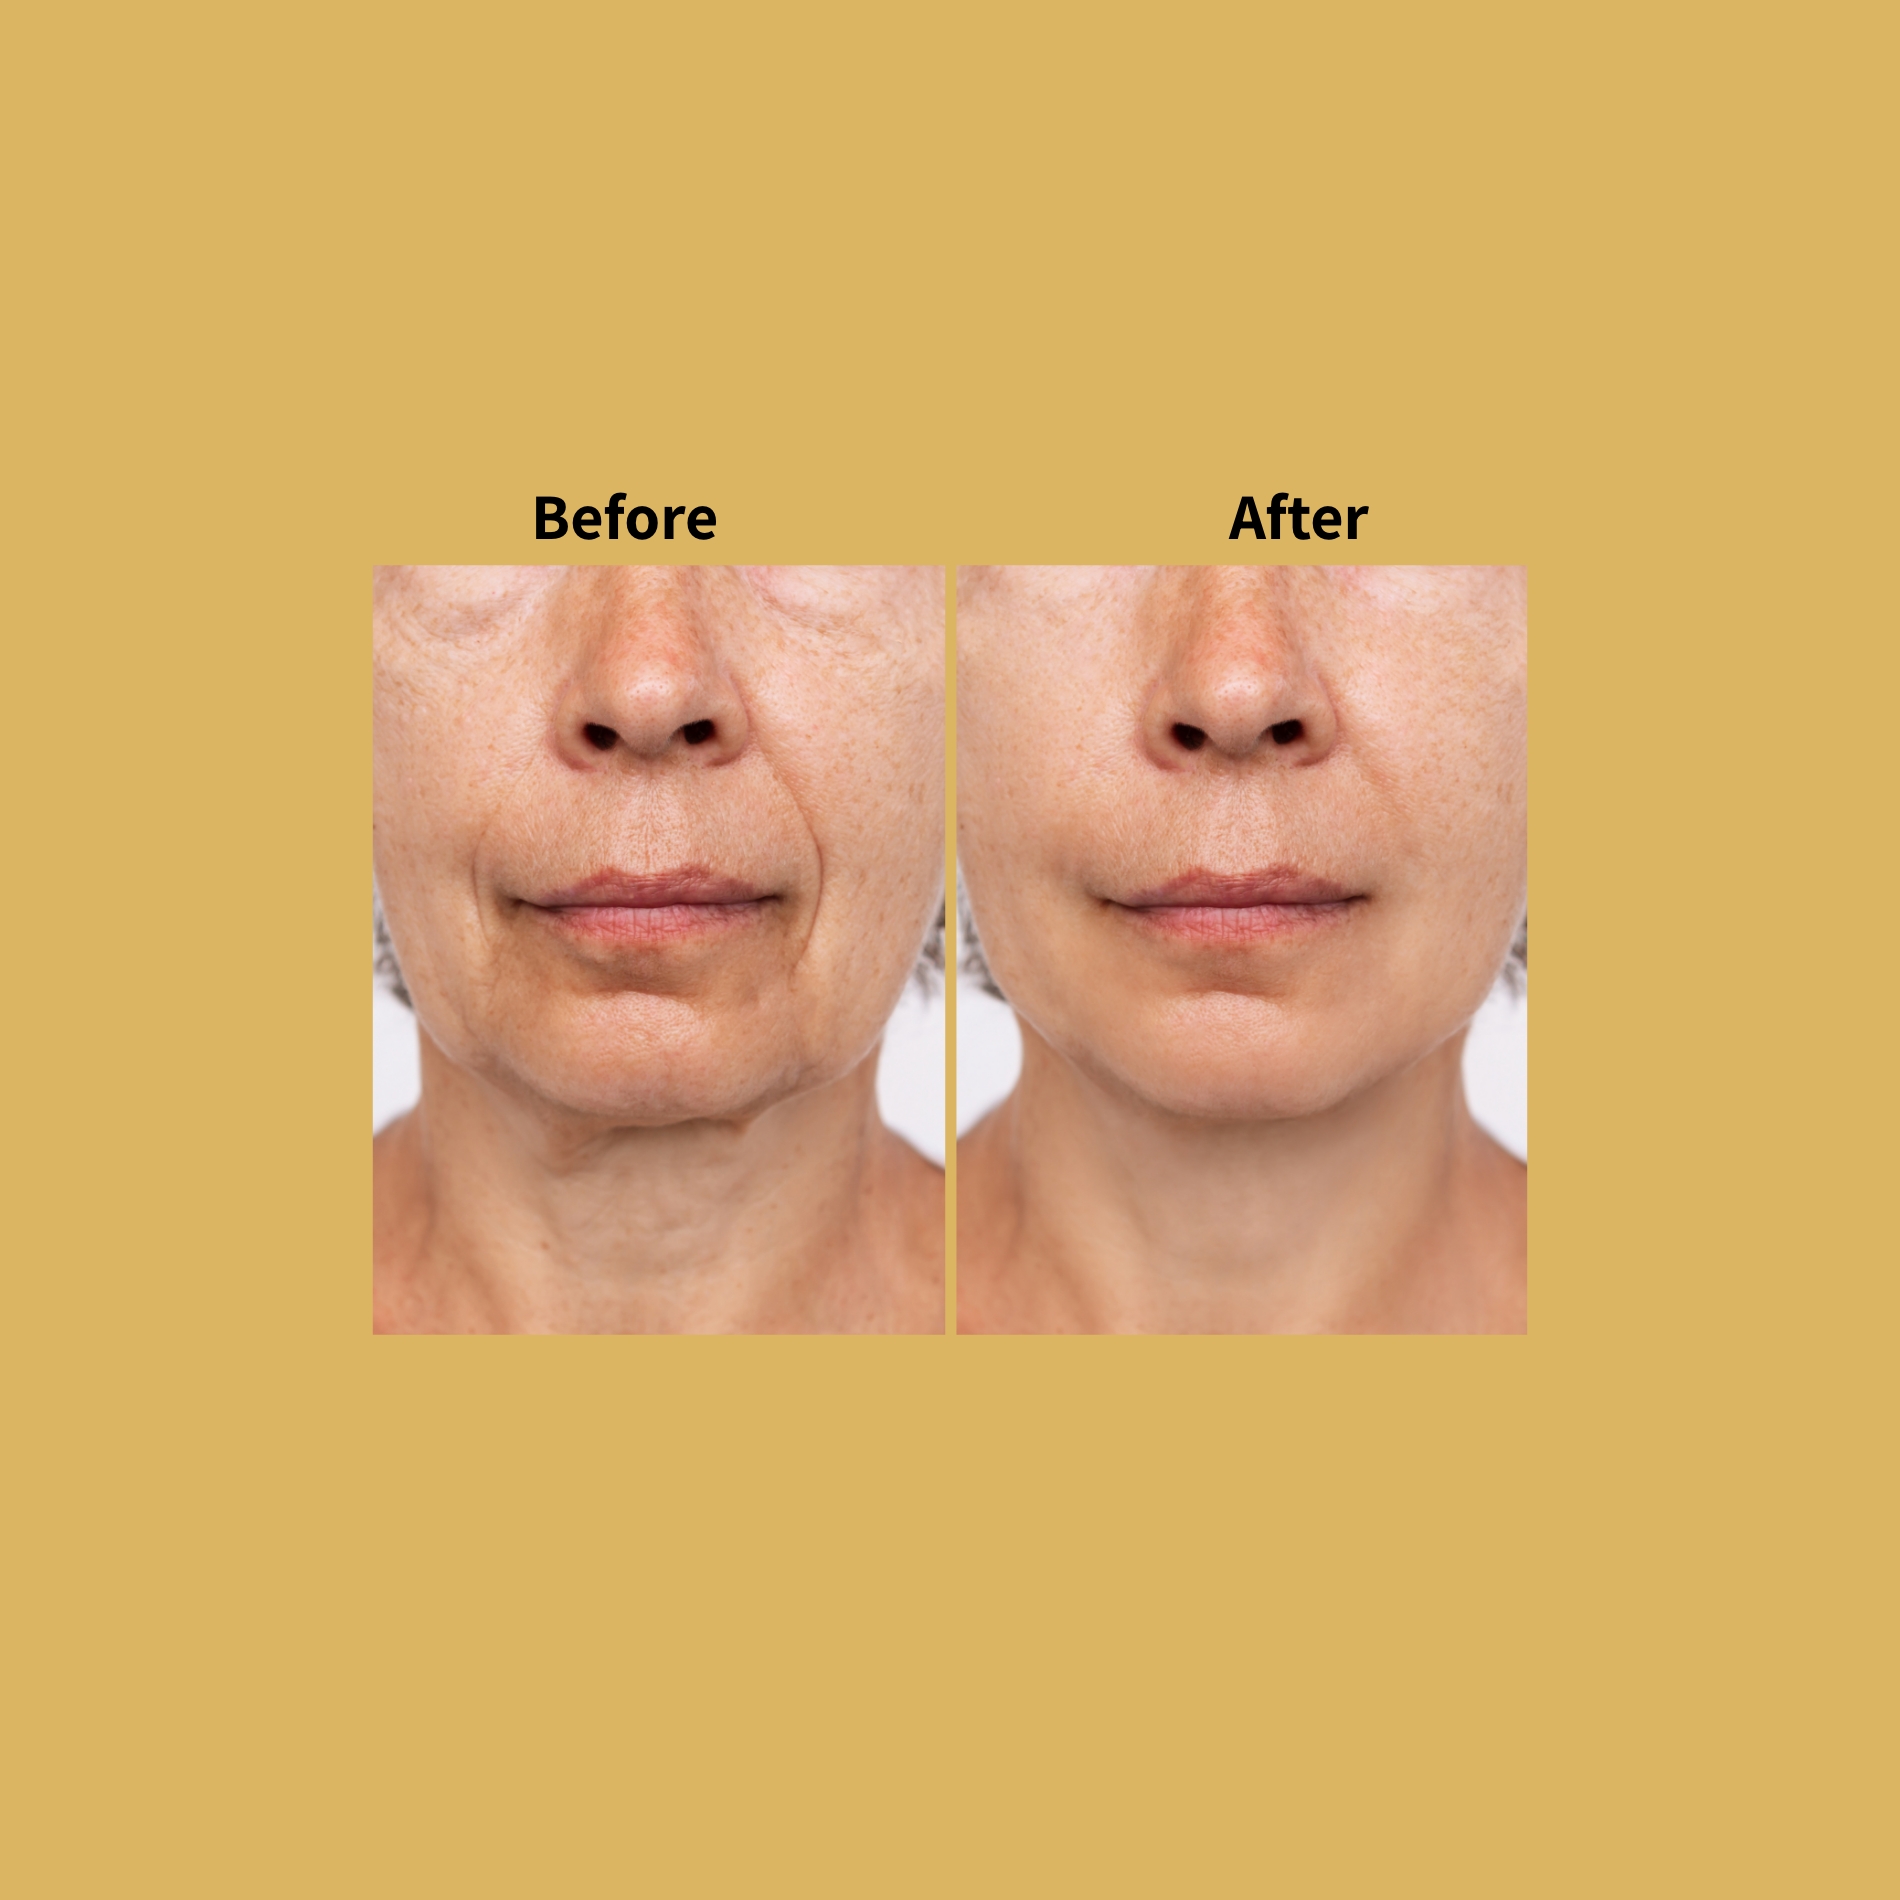 Secret RF Fractional Microneedling Before and After Photos | Soleil Medical & Beauty Spa in Portland, OR